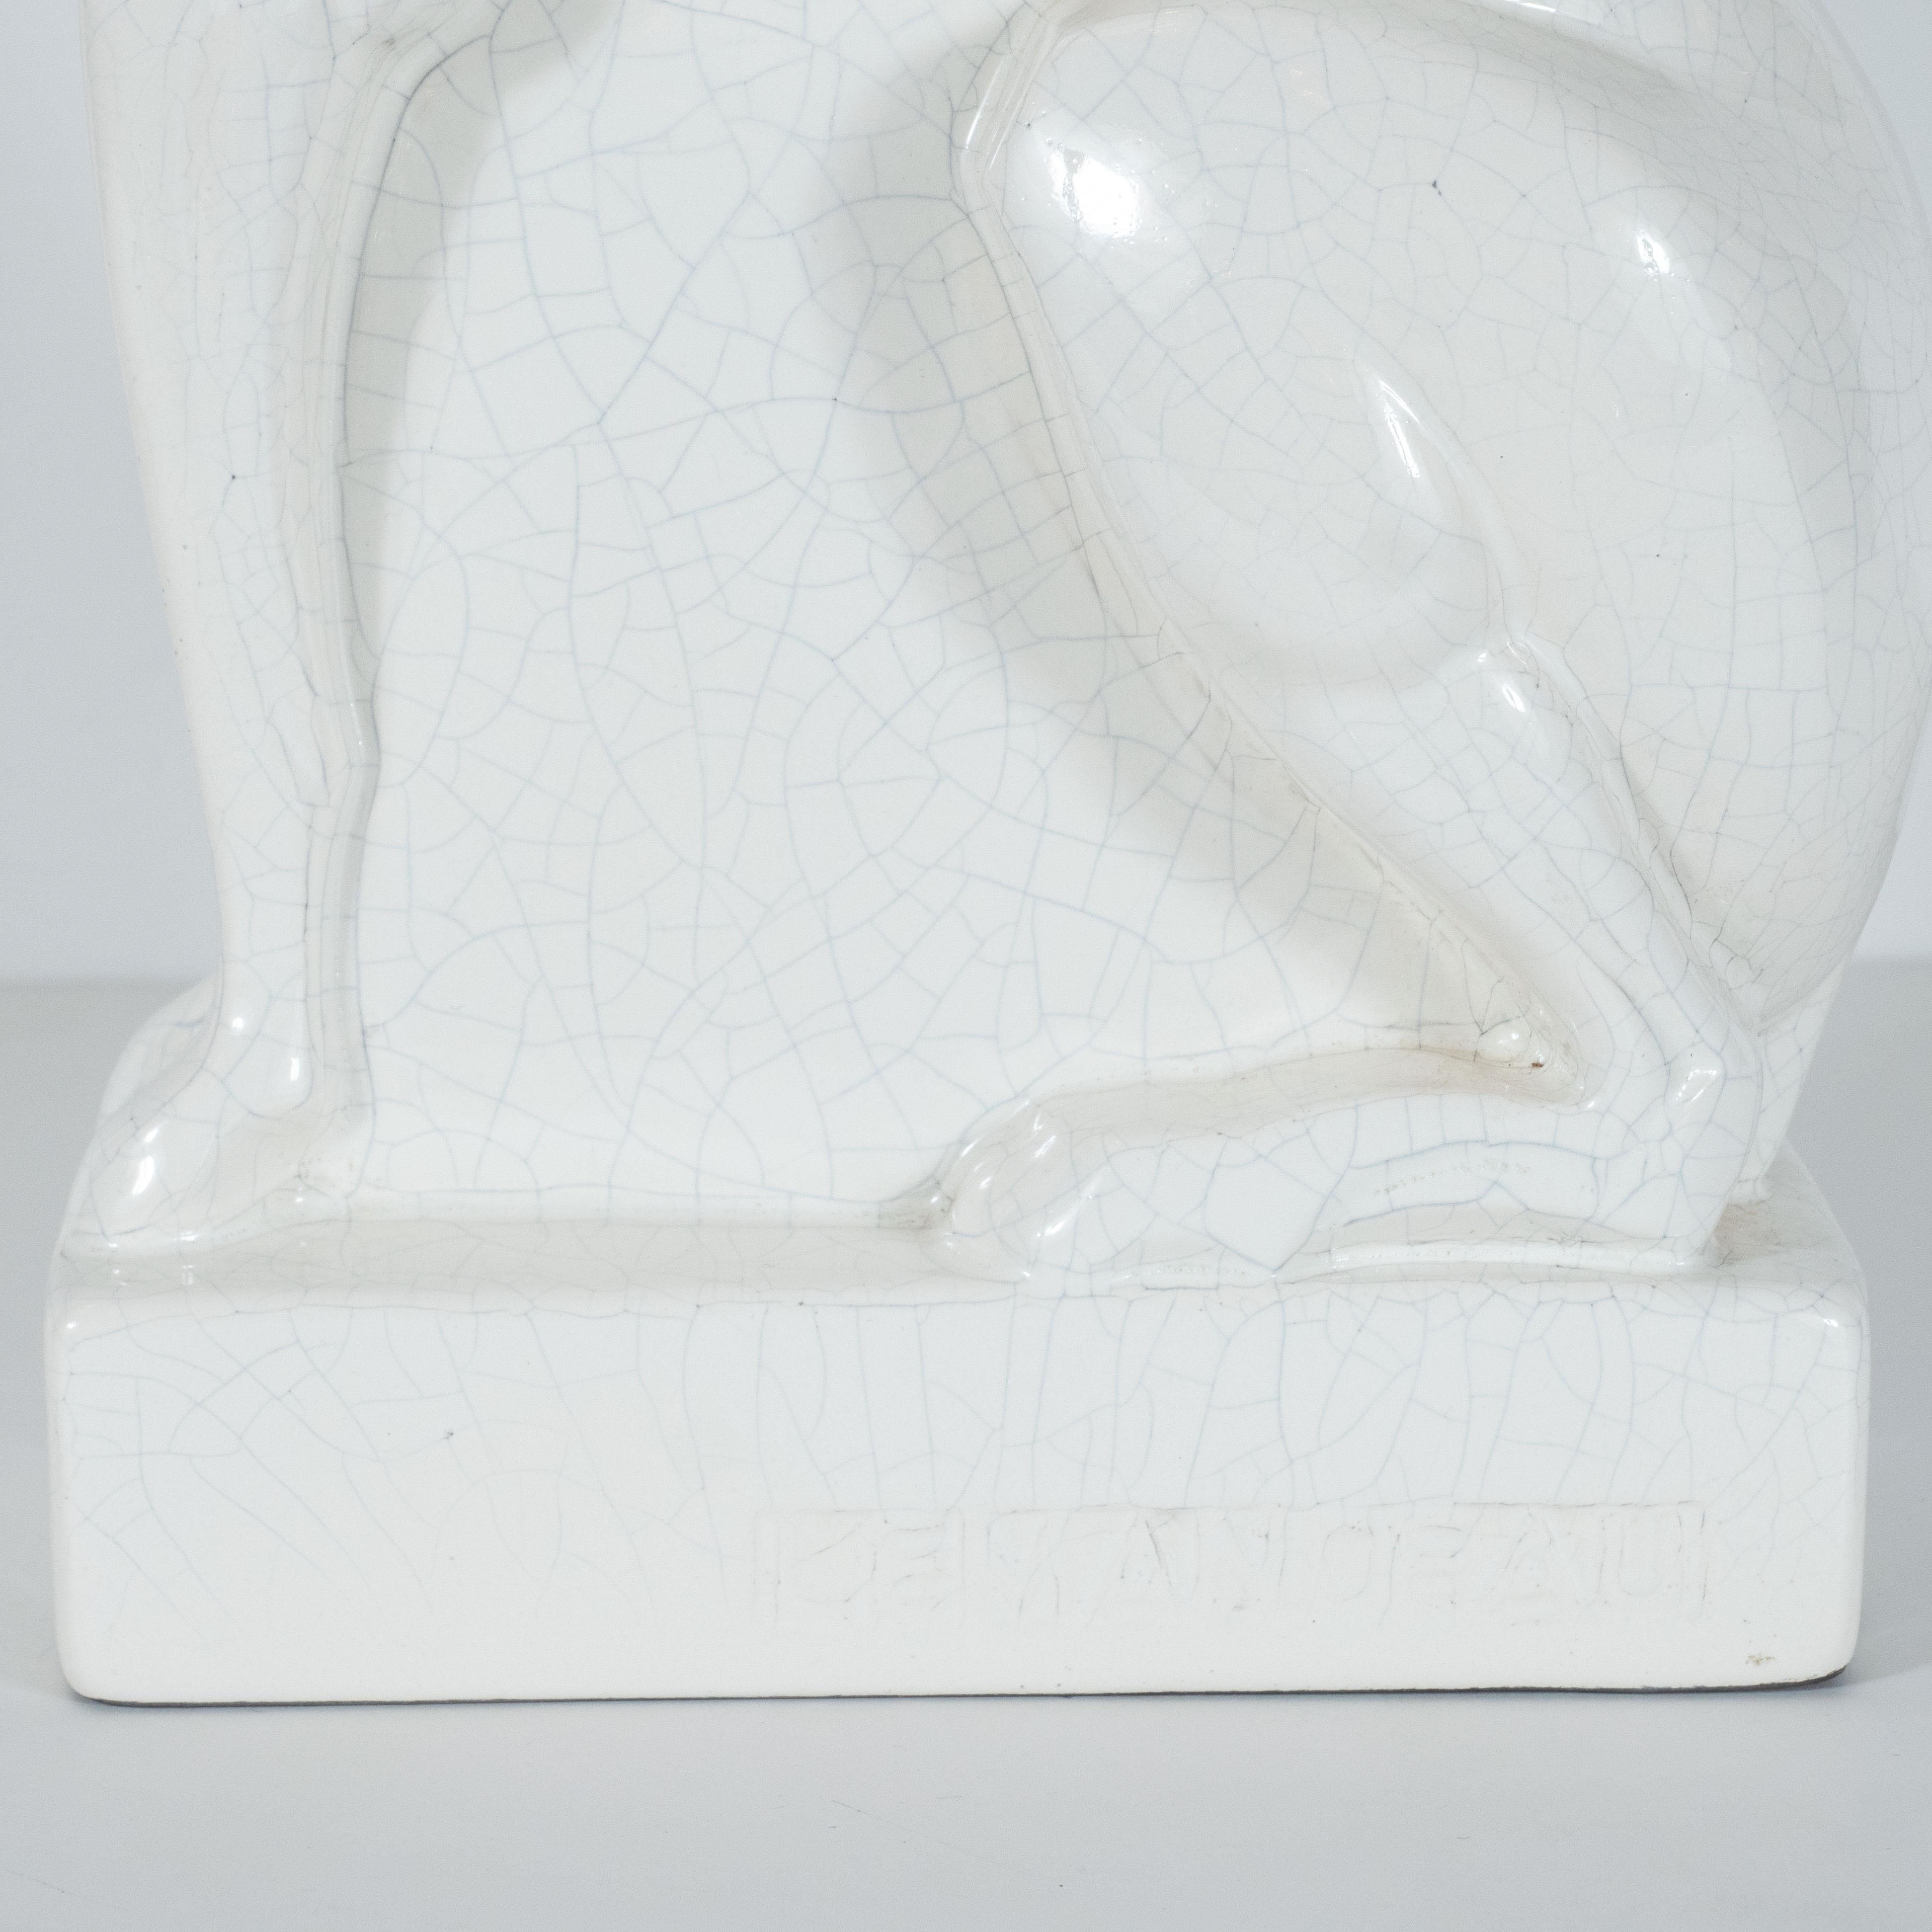 French Art Deco Craqueleur White Ceramic Greyhound Signed by Charles Lemanceau For Sale 5